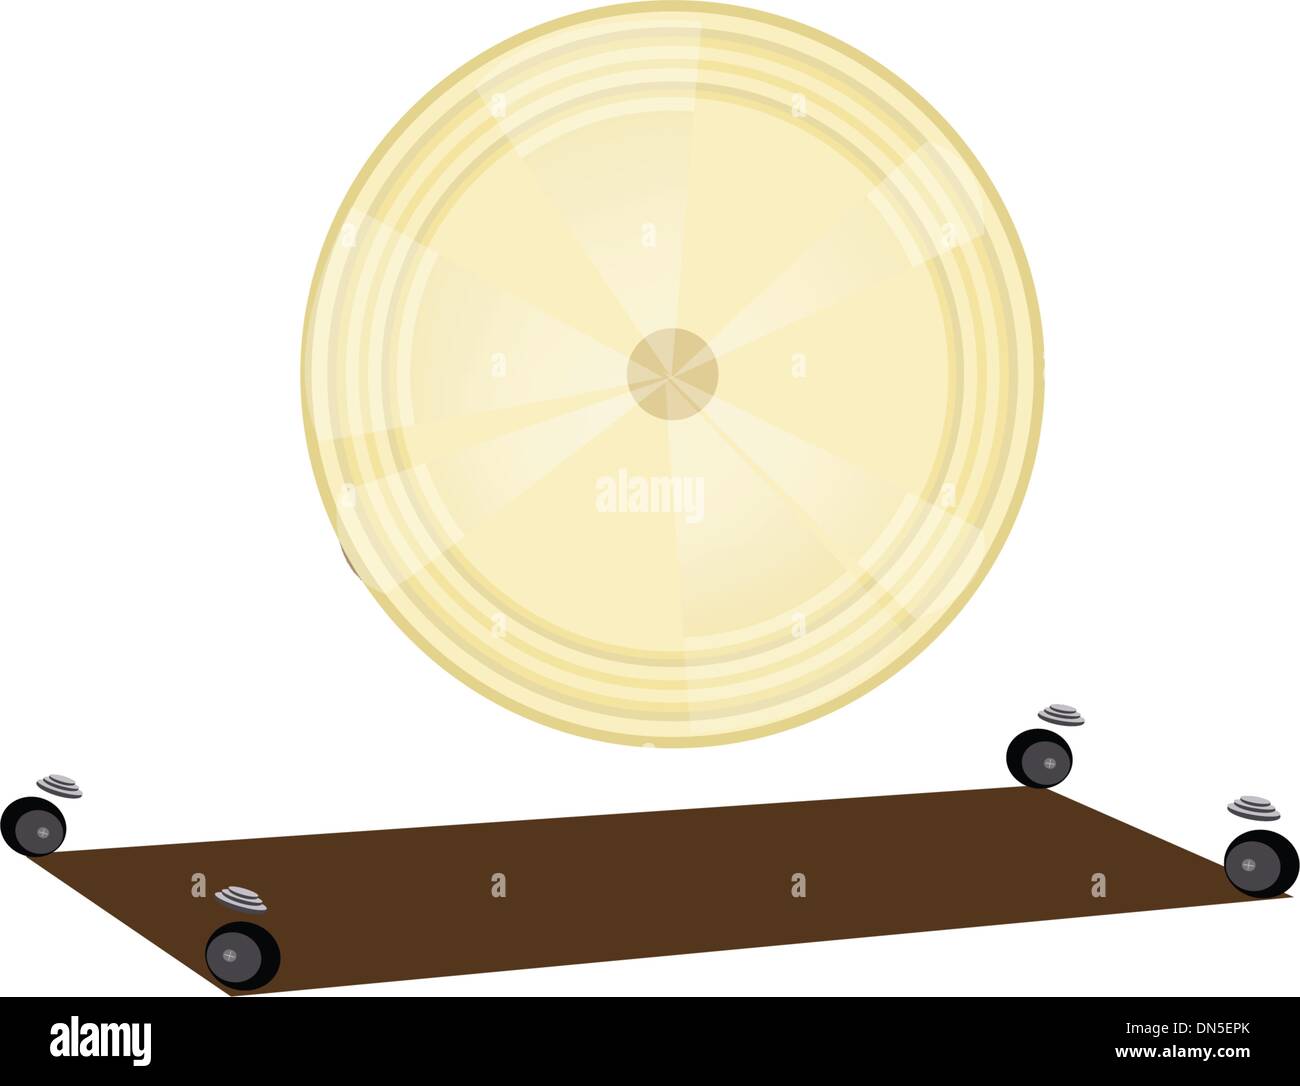 A Musical Gong on Dark Brown Background Stock Vector